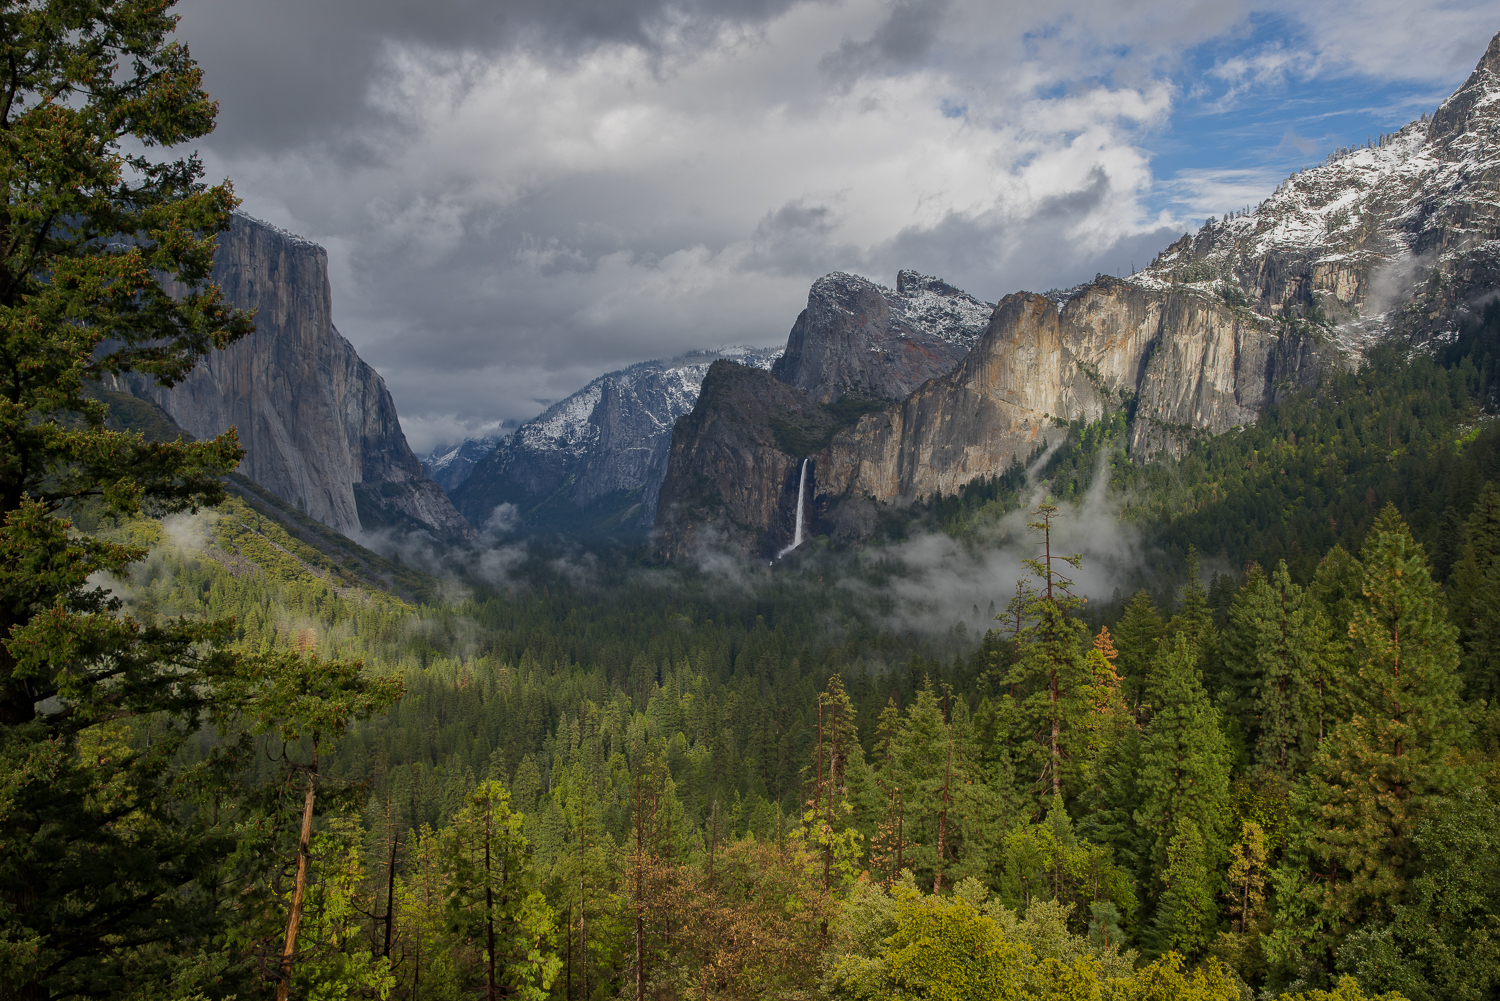 The View from the Tunnel View lookout point in Spring. Shot with a Sony a7r